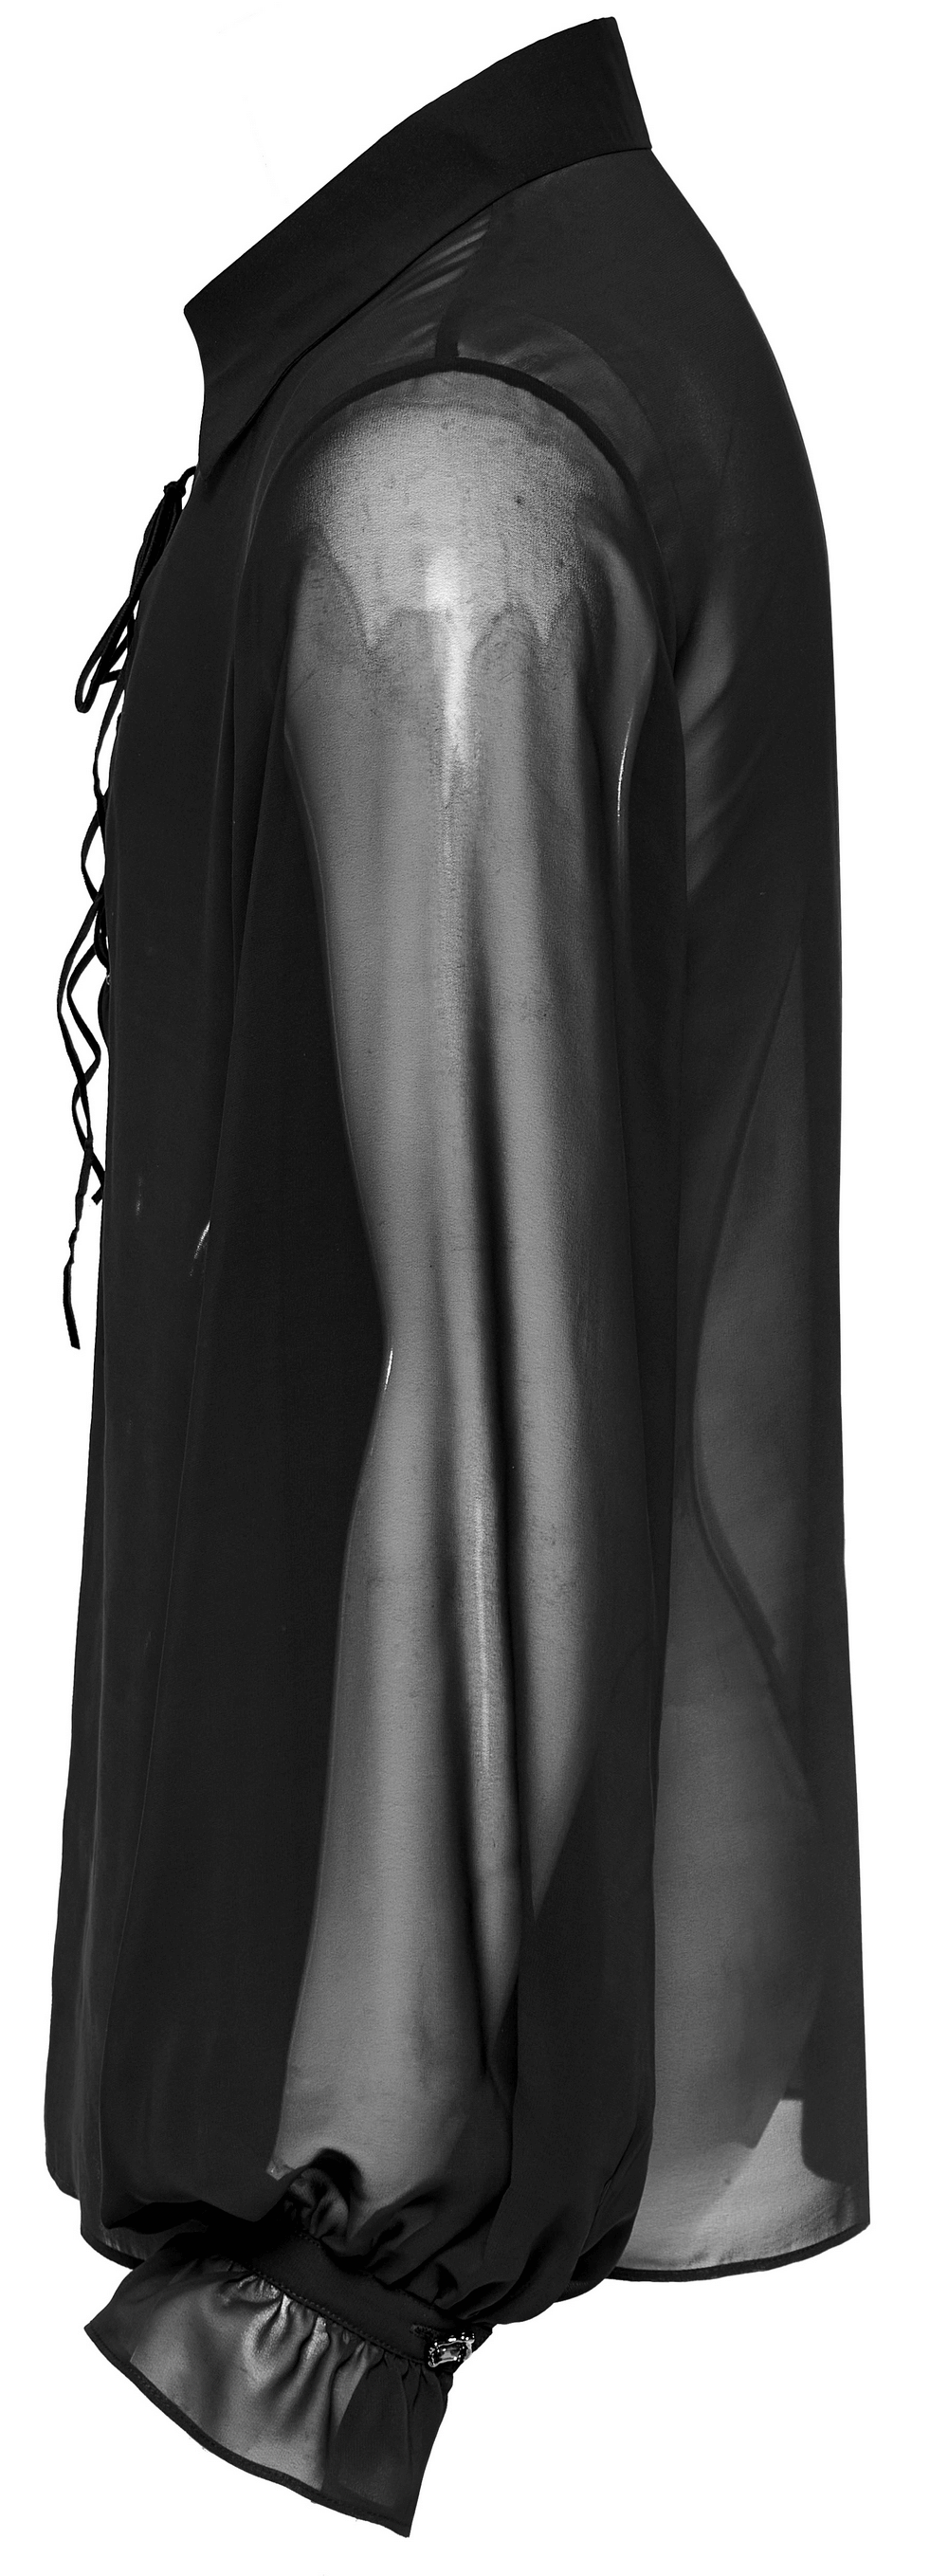 Men's Gothic Shirt: Sheer Chiffon with Lace-Up Front